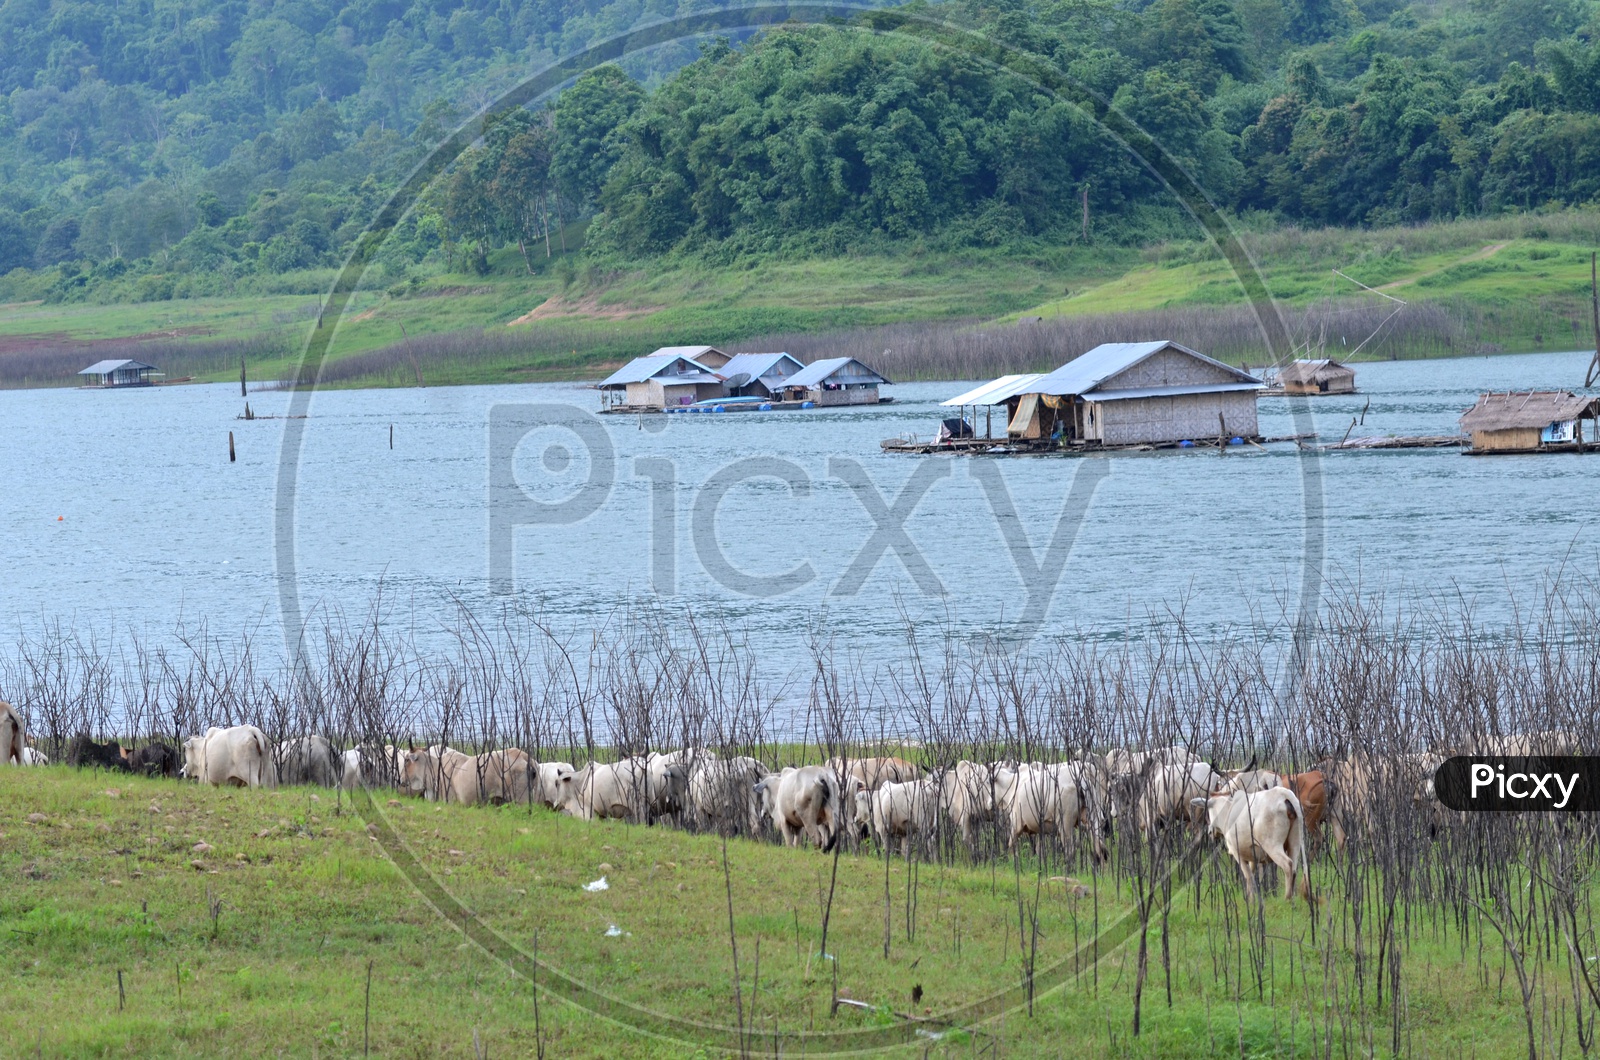 Cows in a meadow along the riverside, Thailand